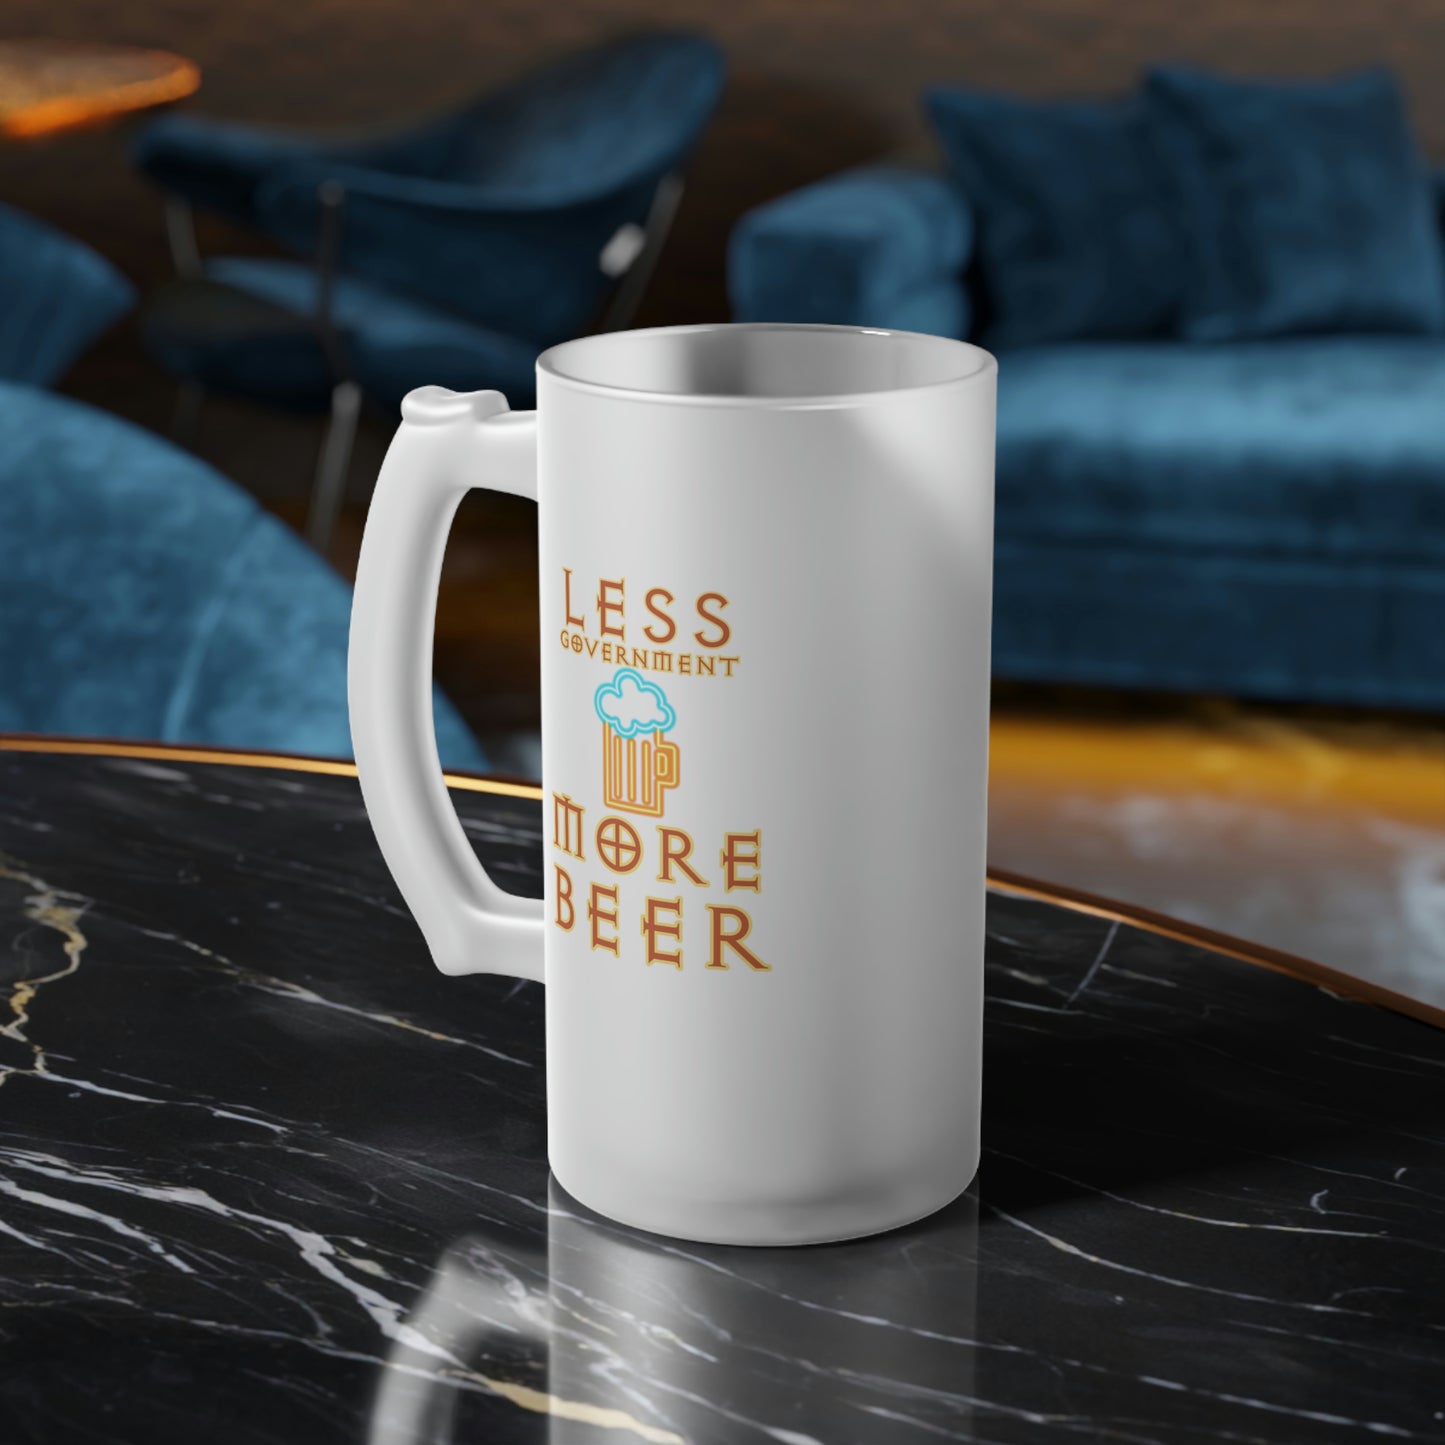 Less Government More Beer Frosted Glass Beer Mug